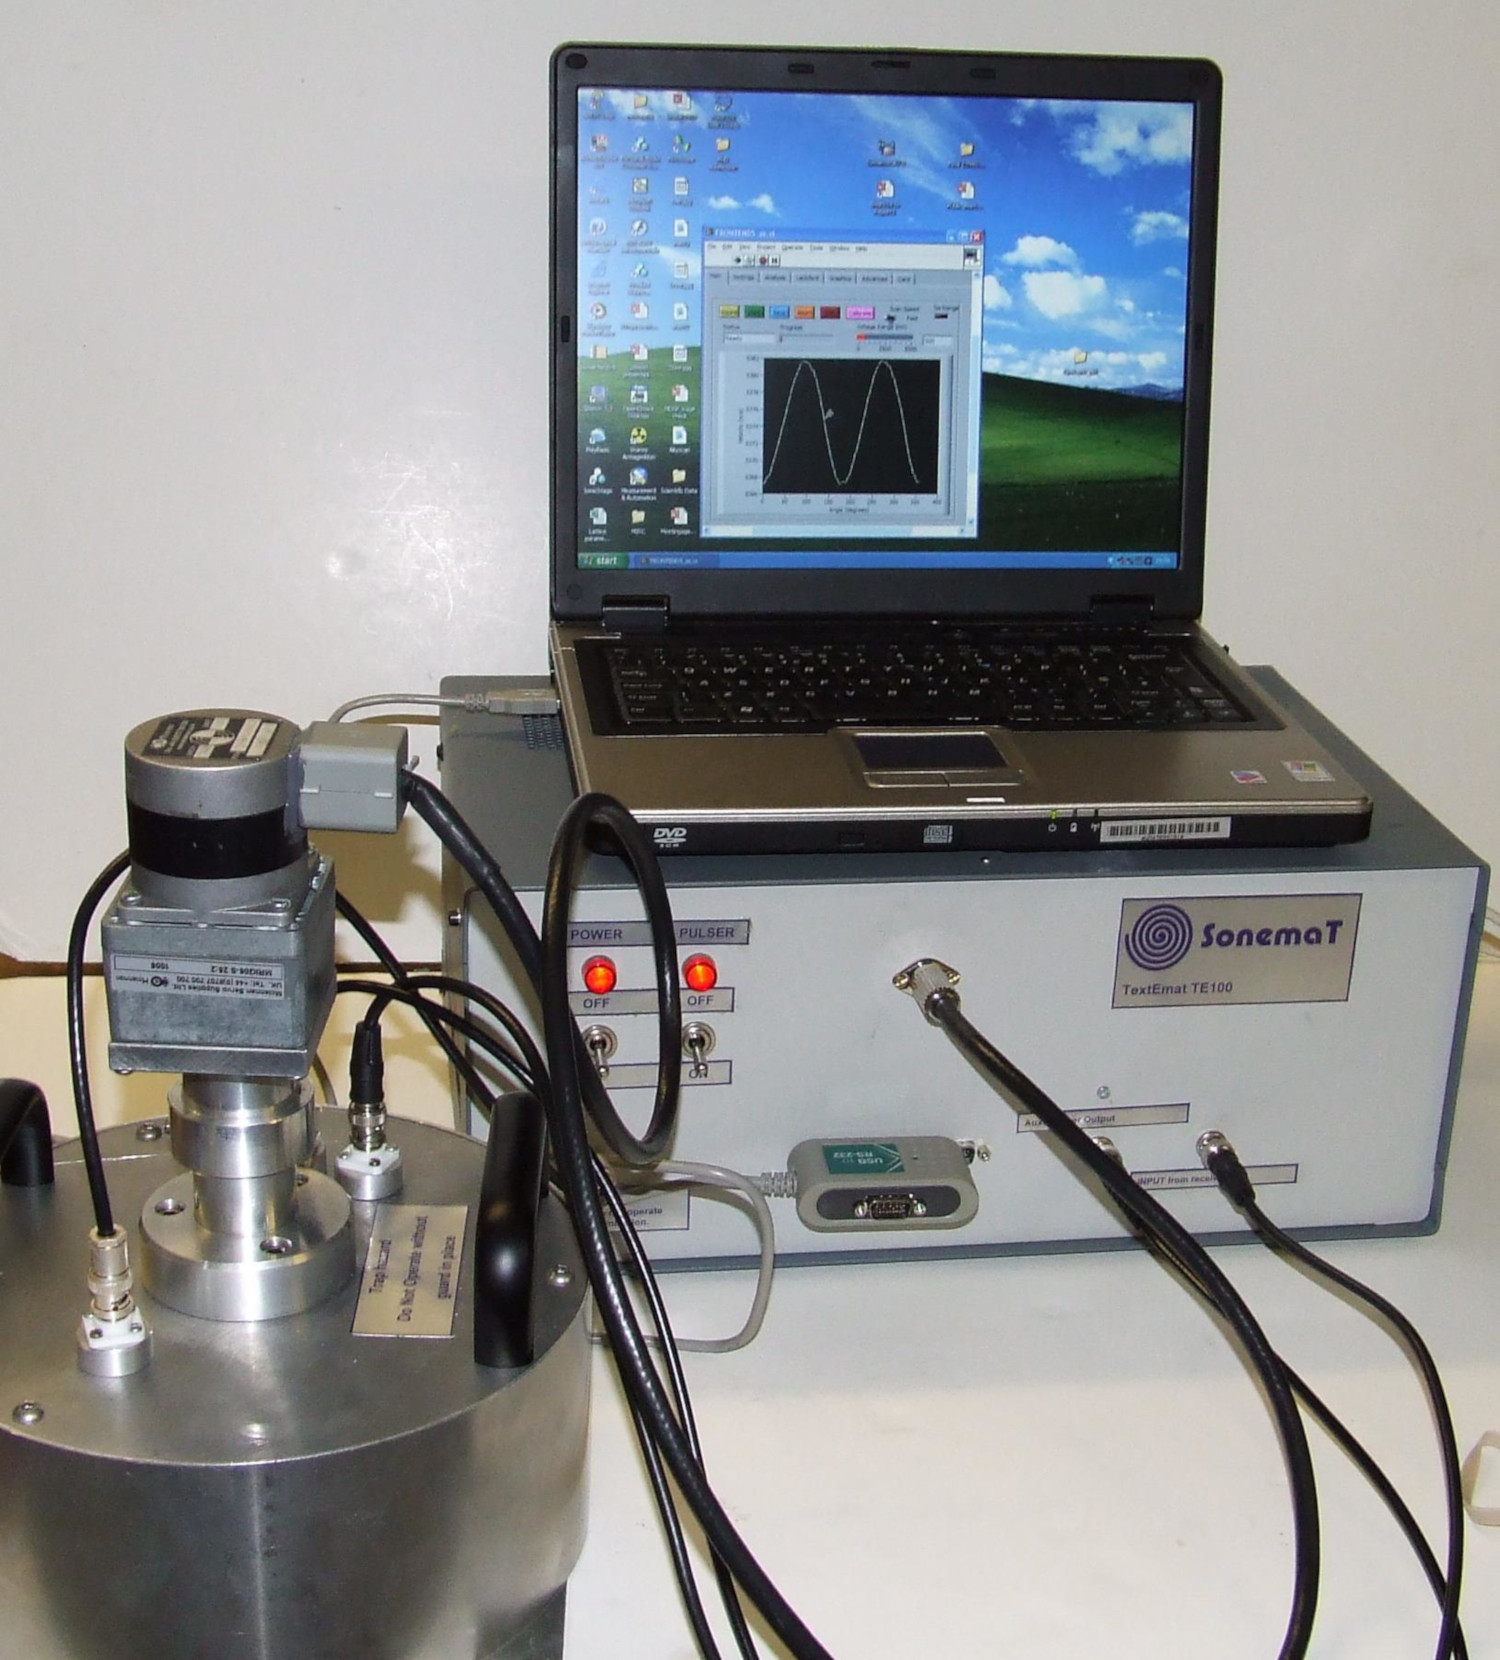 Ultrasonic texture measurement system in our labs. The whole system can easily be transported by car